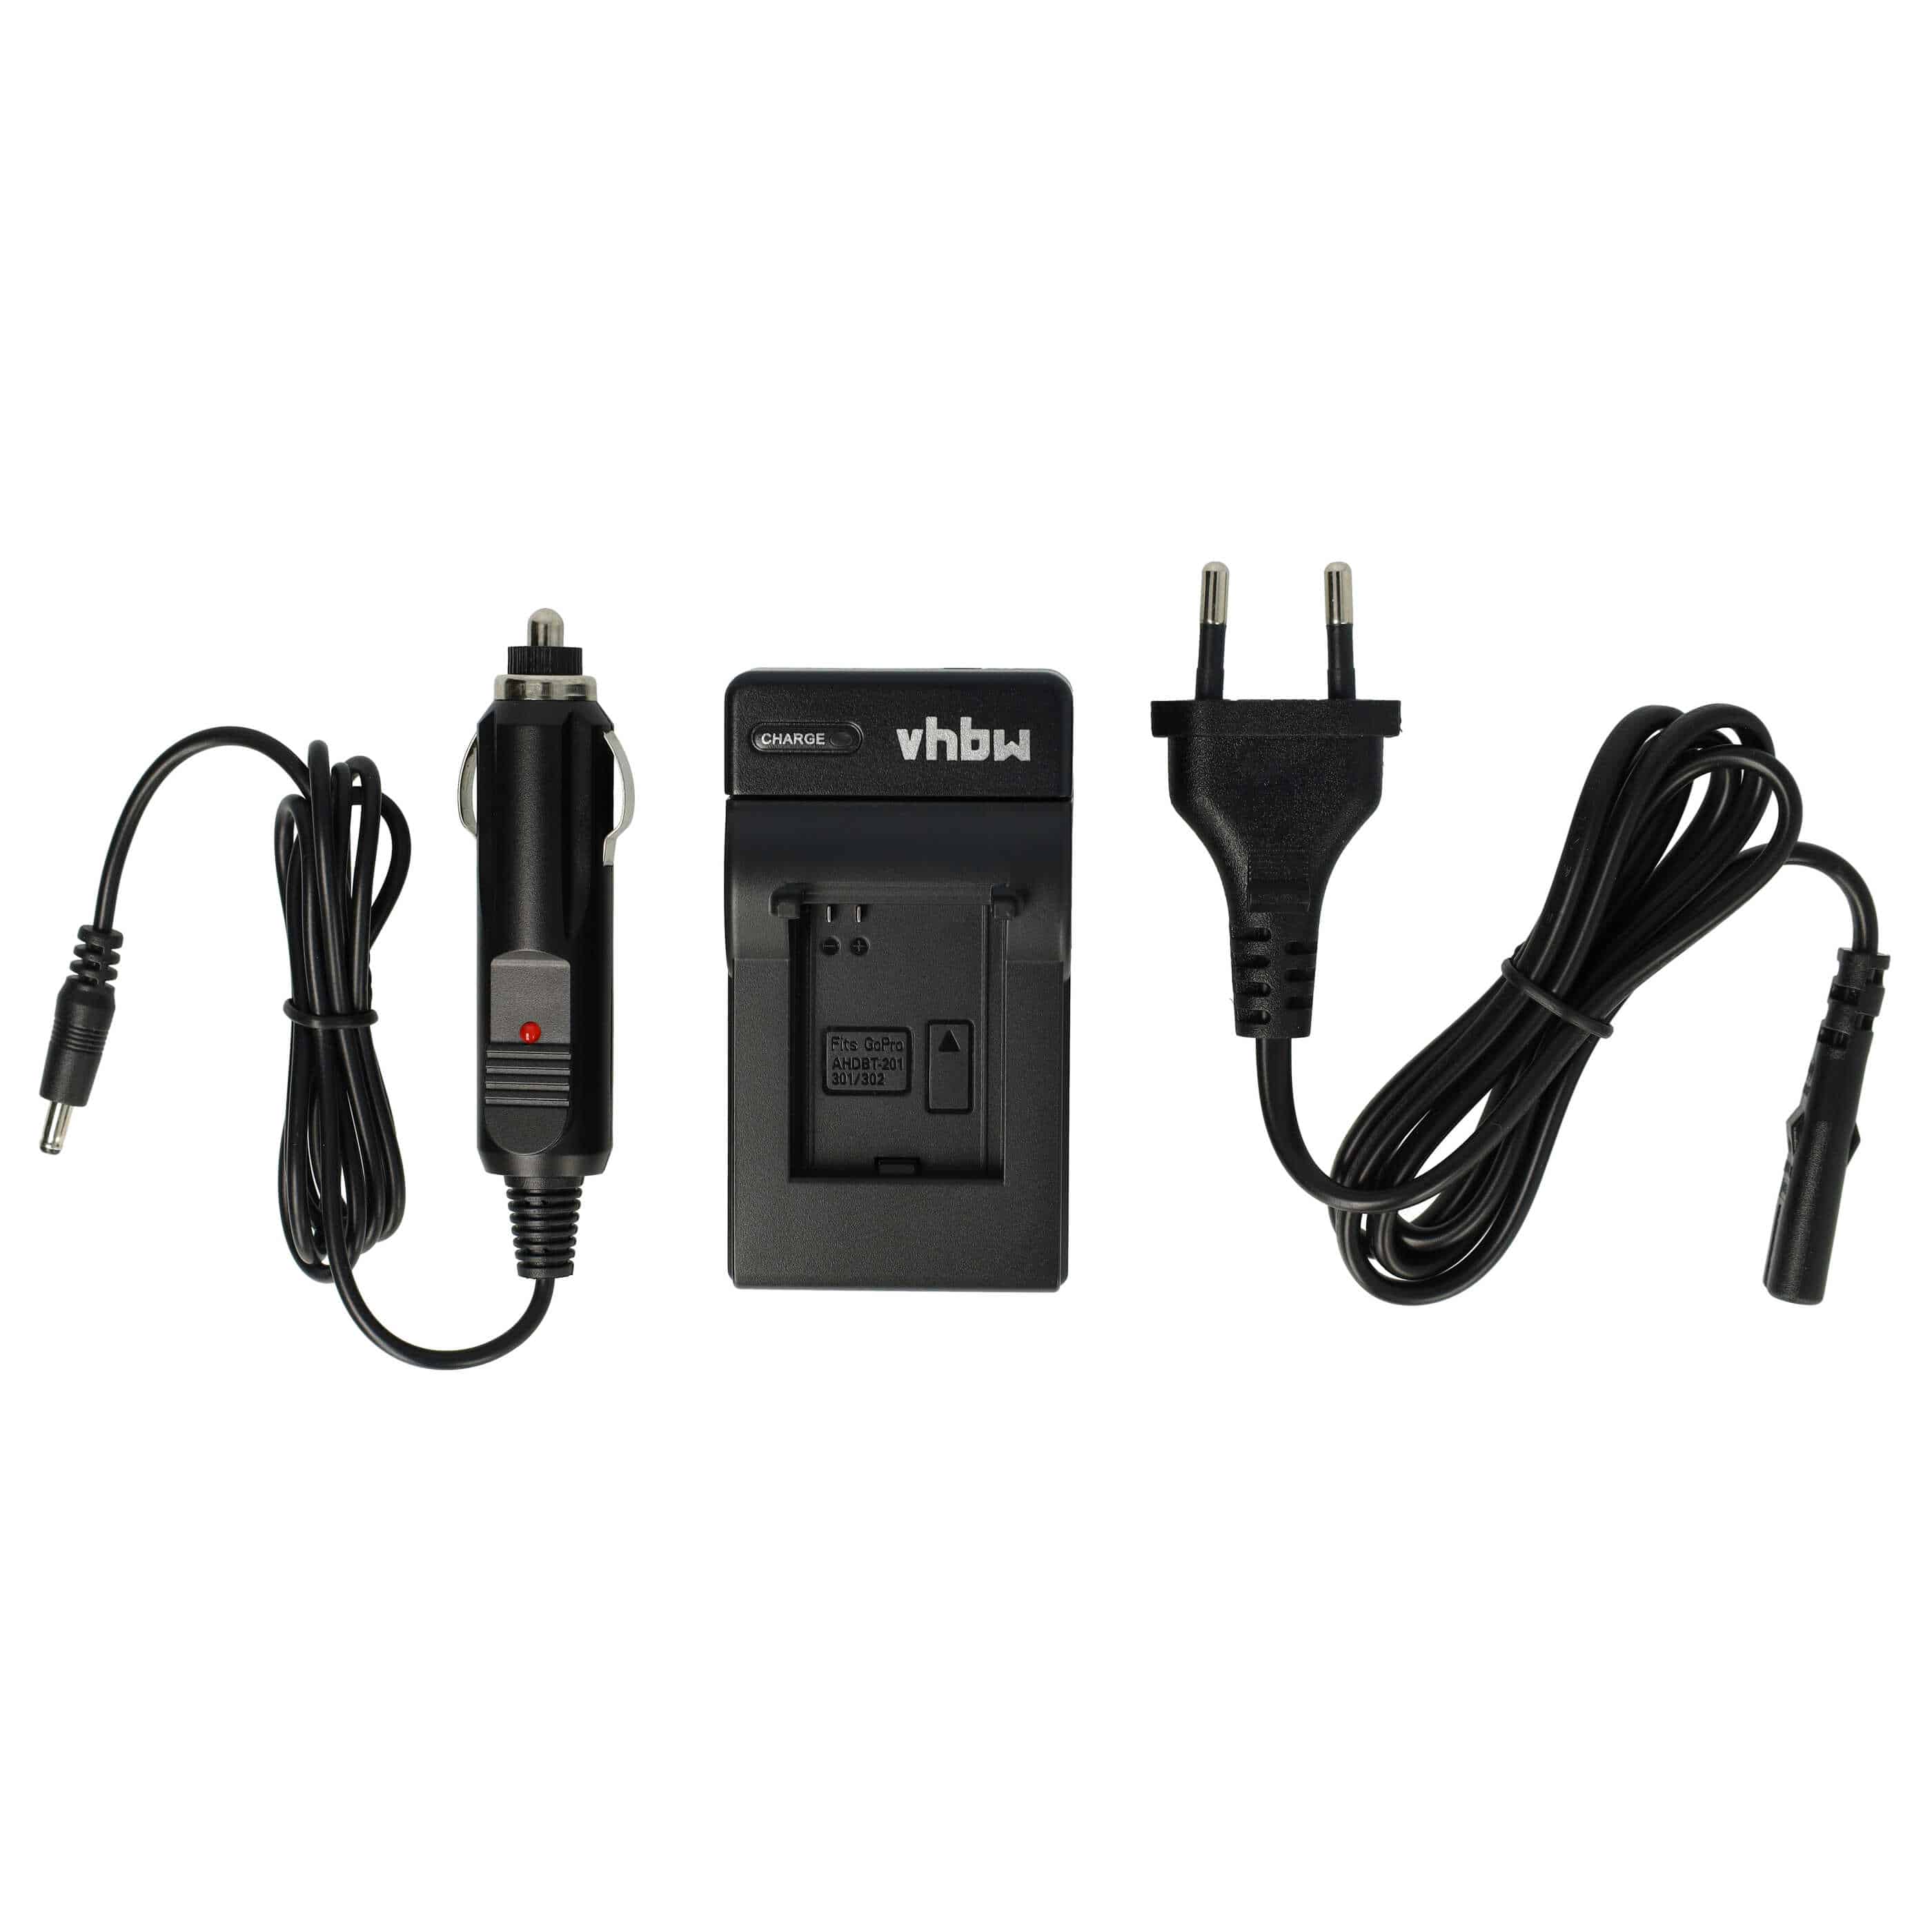 Battery Charger suitable for GoPro ABPAK-001 Camera etc. - 0.6 A, 4.2 V